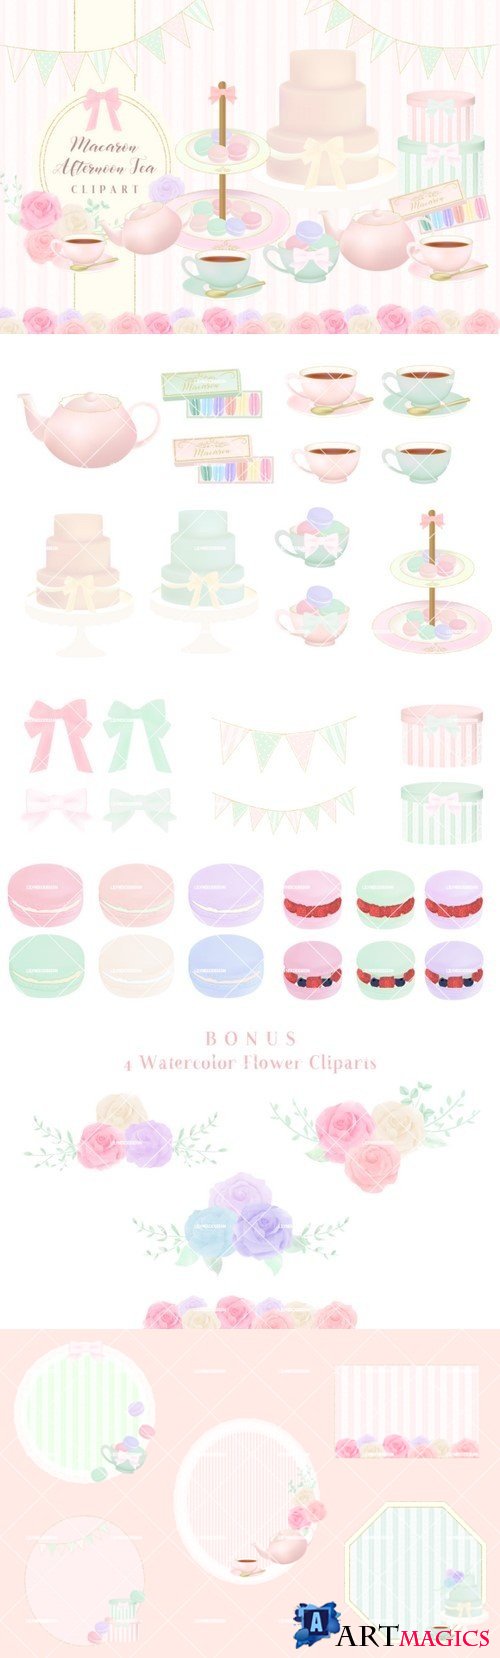 Macaron Afternoon Tea Party Cliparts